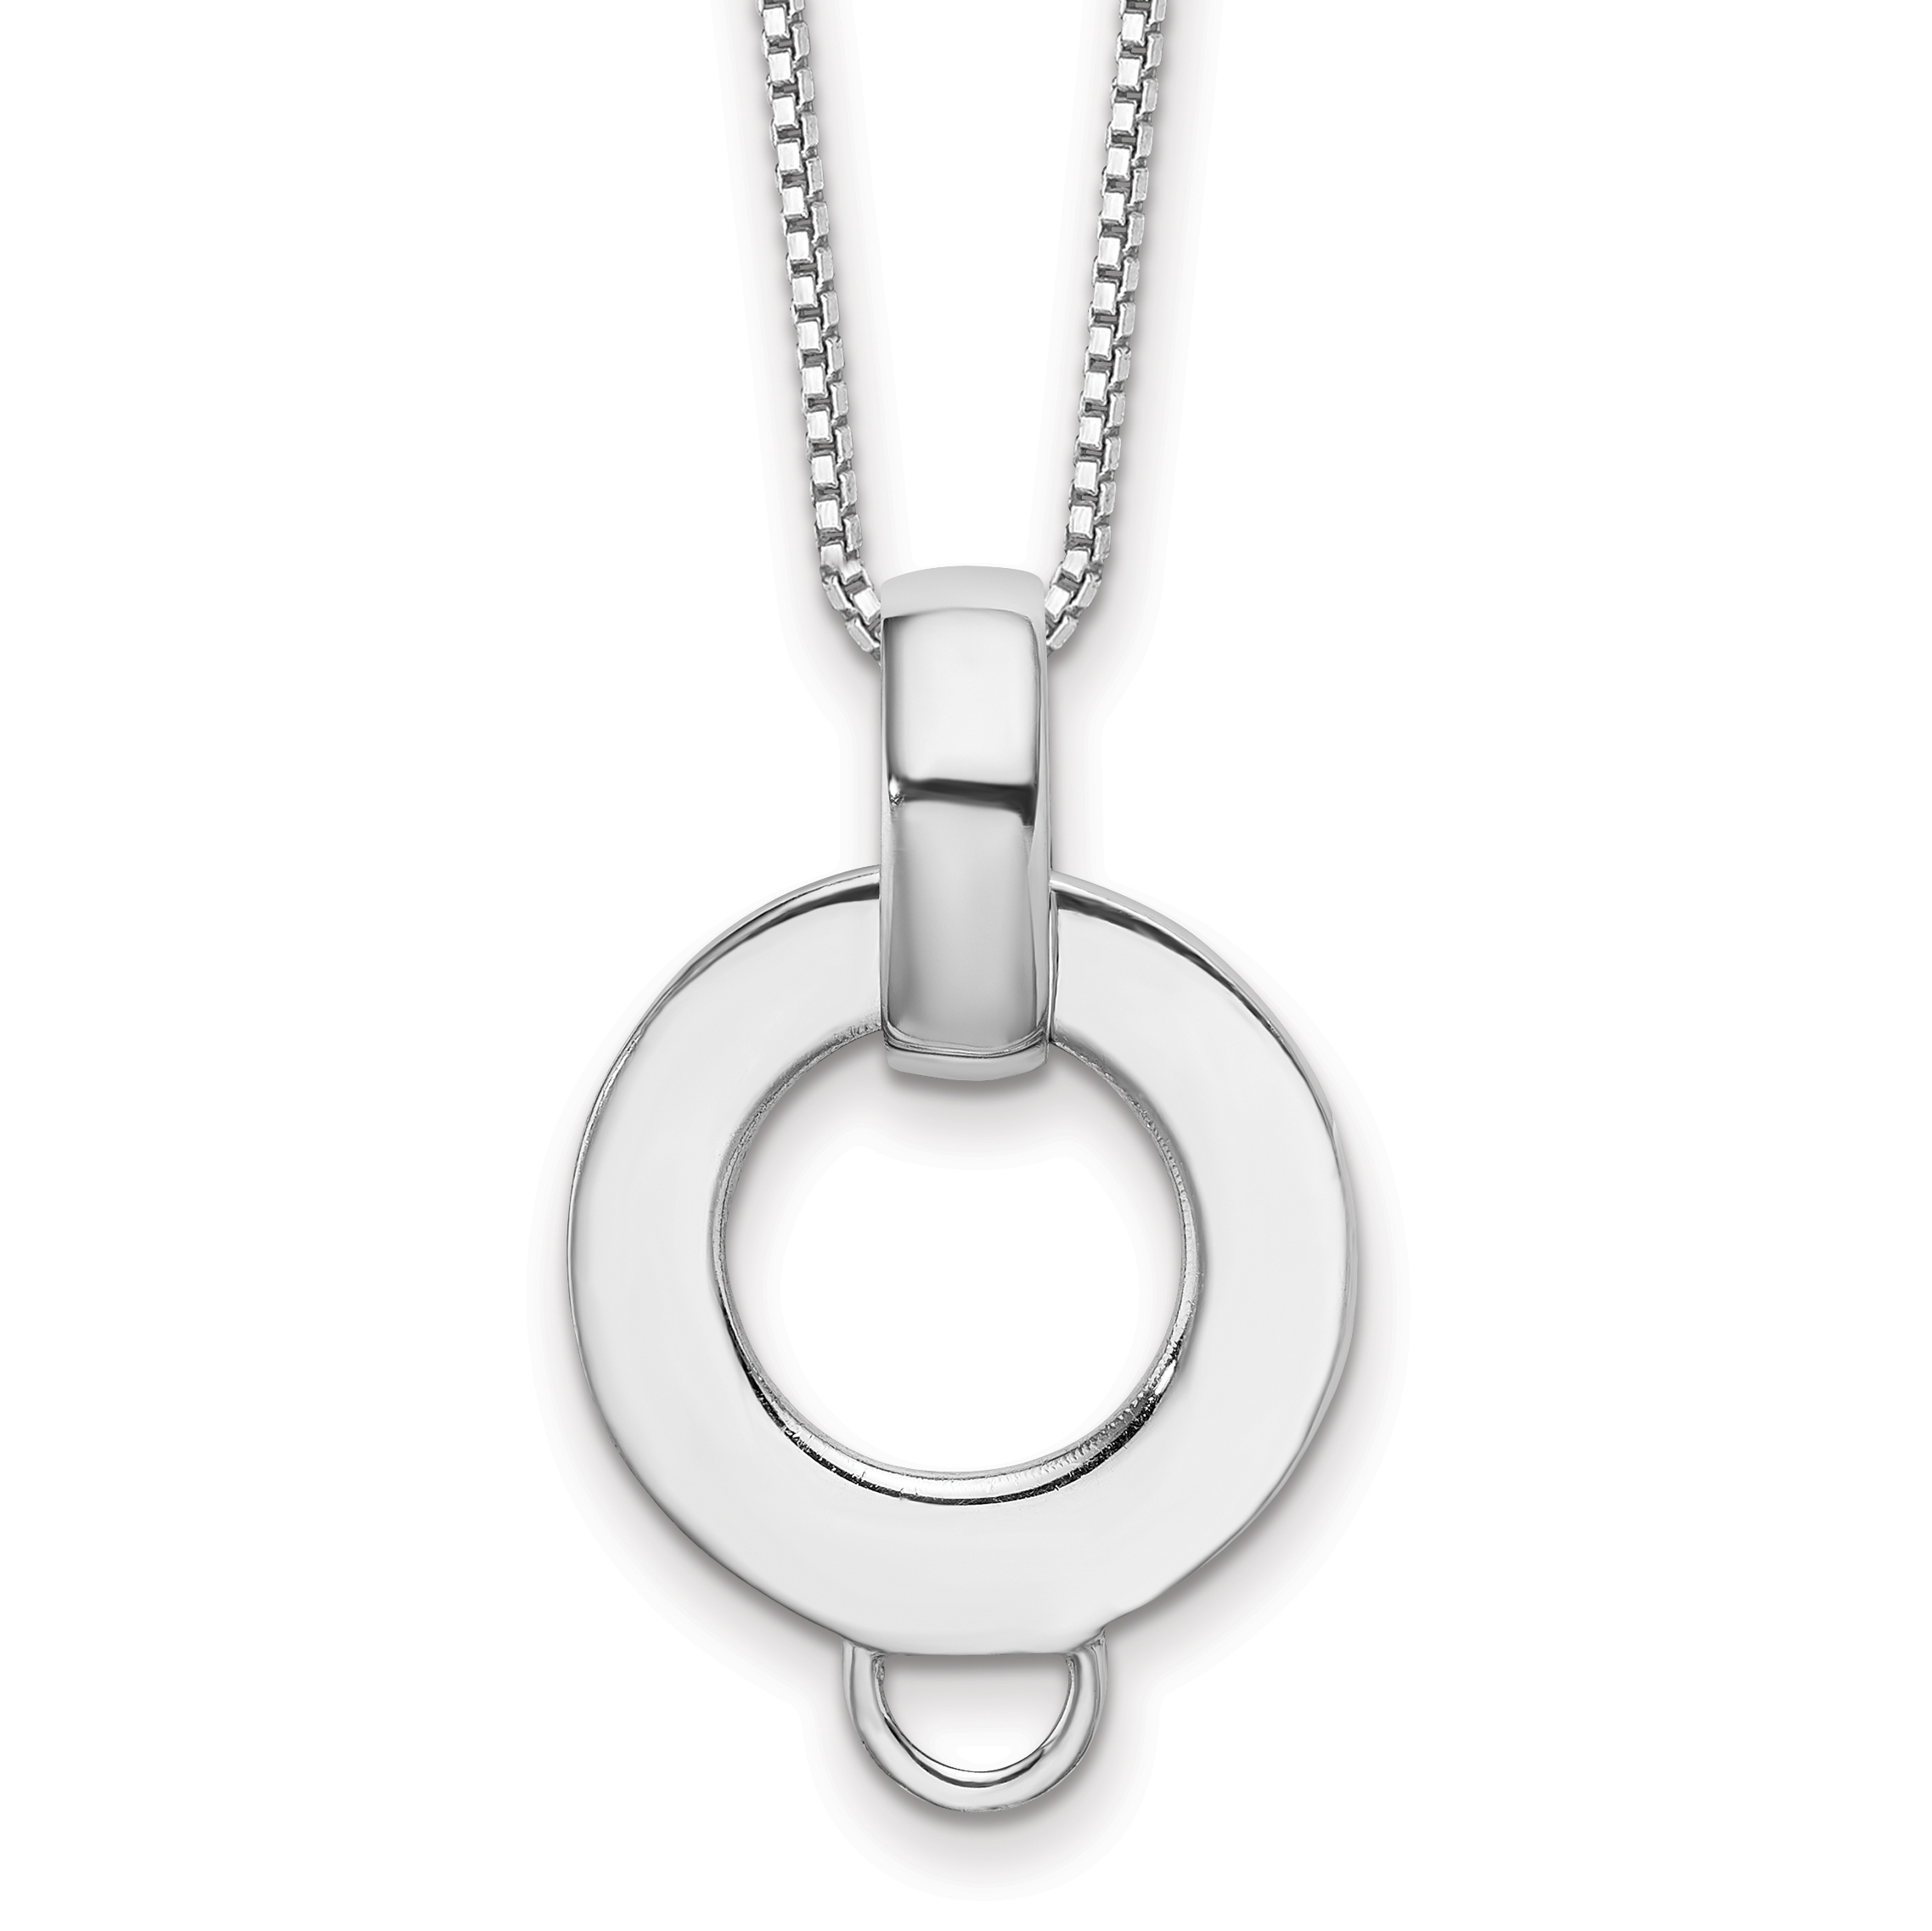 Sterling Silver Charm Holder and Cable Chain Necklace, 18